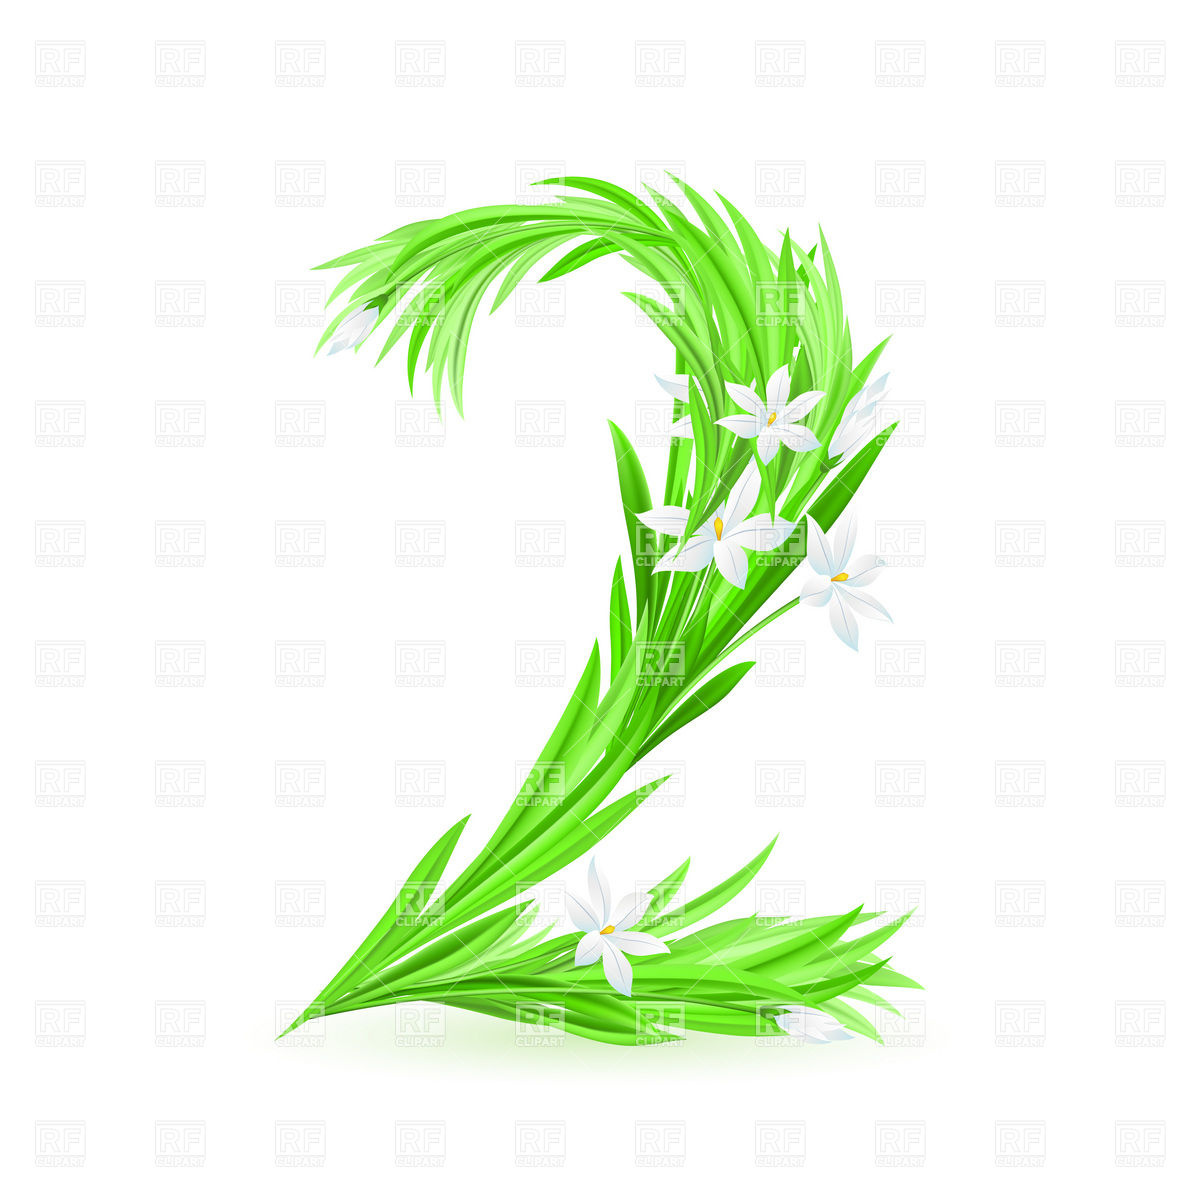 Grass And Spring Flowers Font Numeral 2 8358 Backgrounds Textures